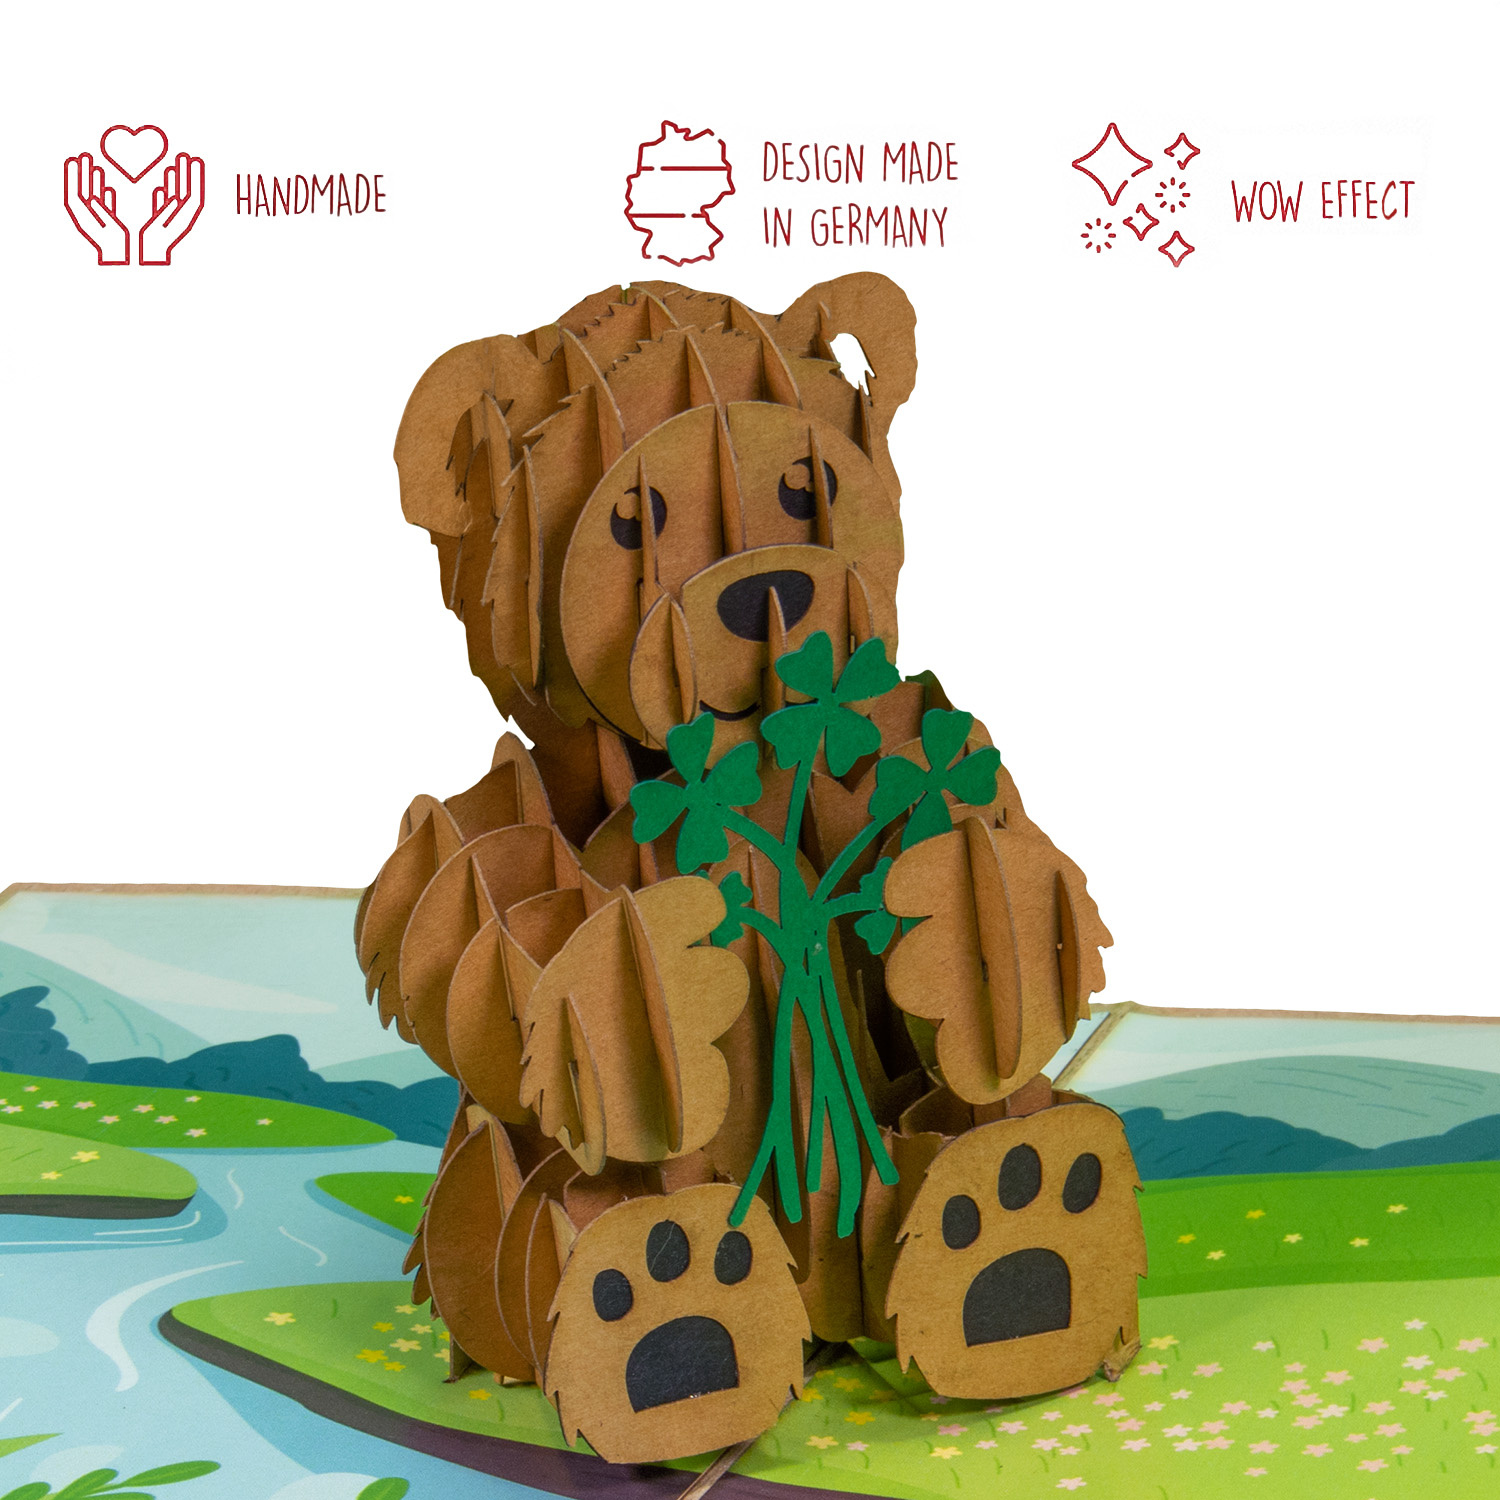 LINPOPUP LINPopUp, pop-up card bear, 3D card, greetings card for a birthday, good luck, pop-up card nature, bear by the river, N78